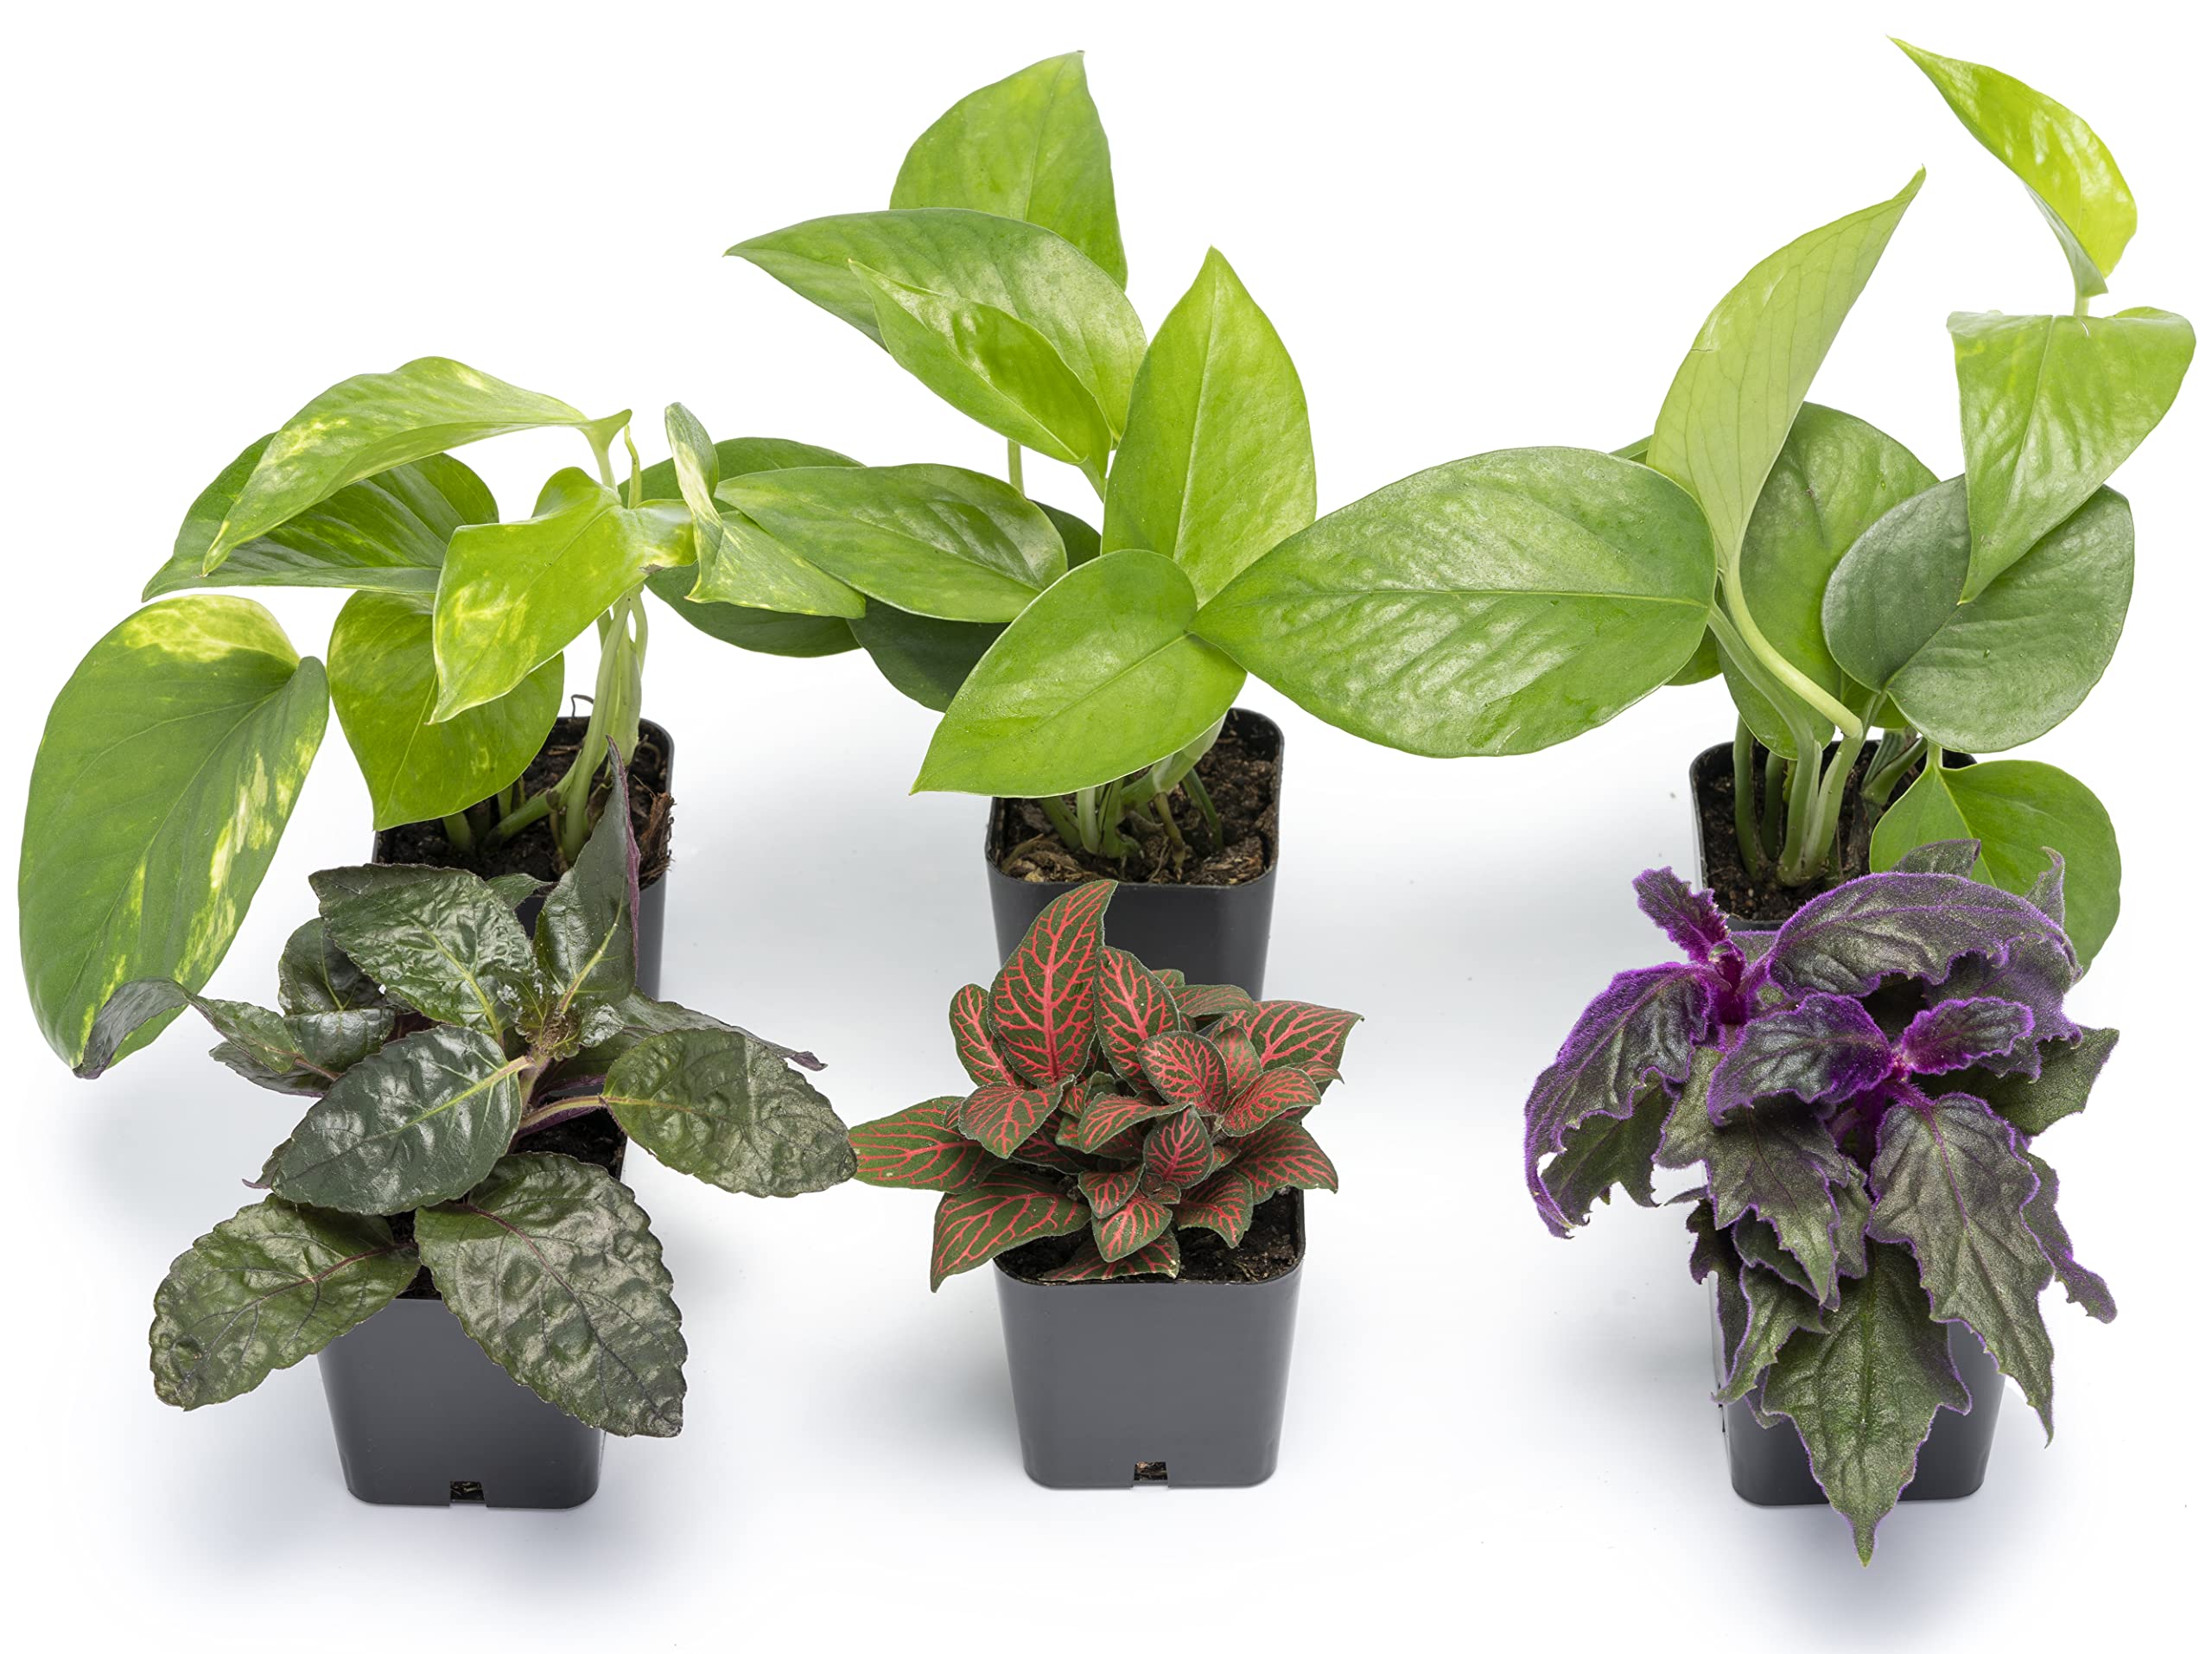 6-Pack Altman Plants Live Indoor Houseplants in 2” nursery pots $18.62 + Free Shipping w/ Prime or on $35+